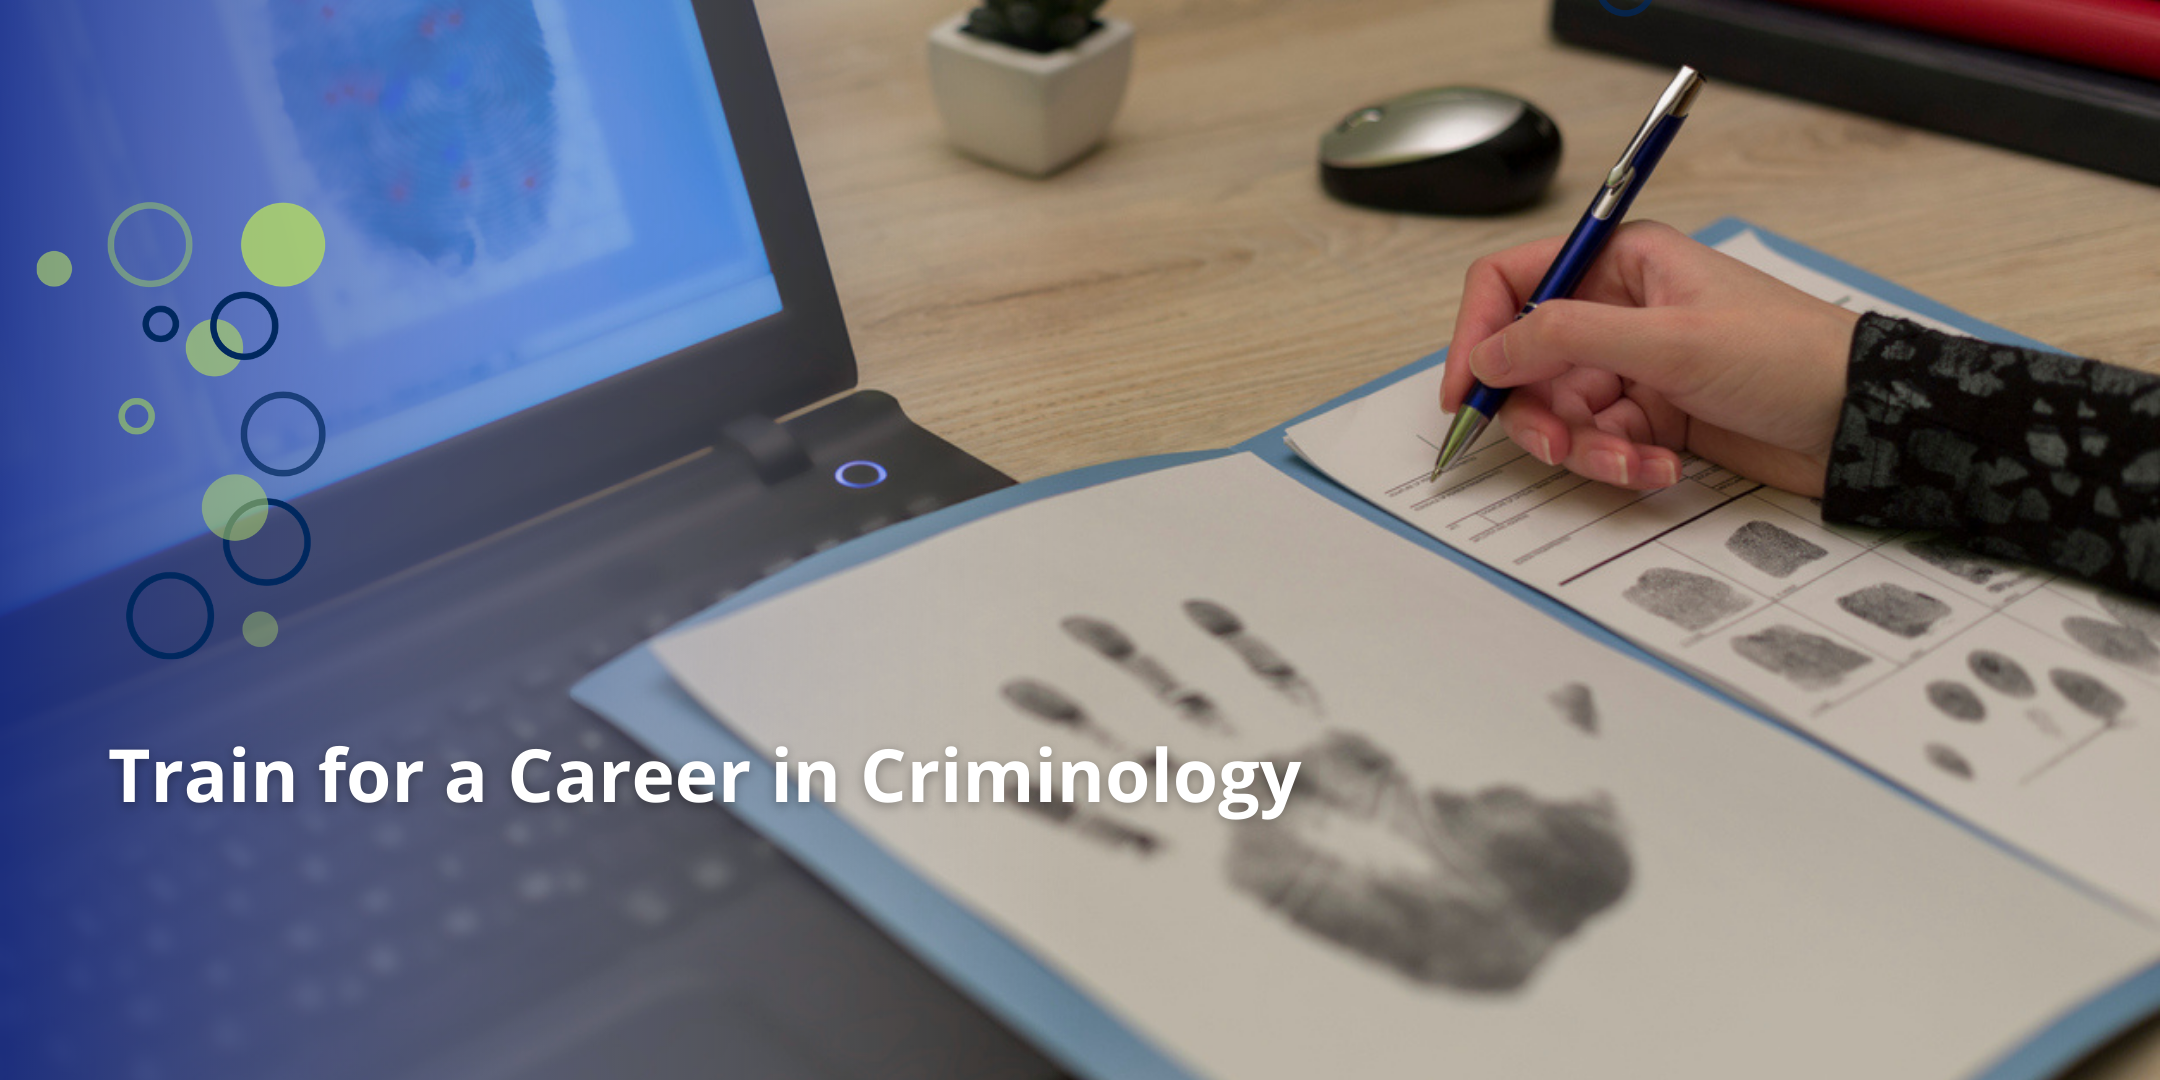 Train for a Career in Criminology featured image